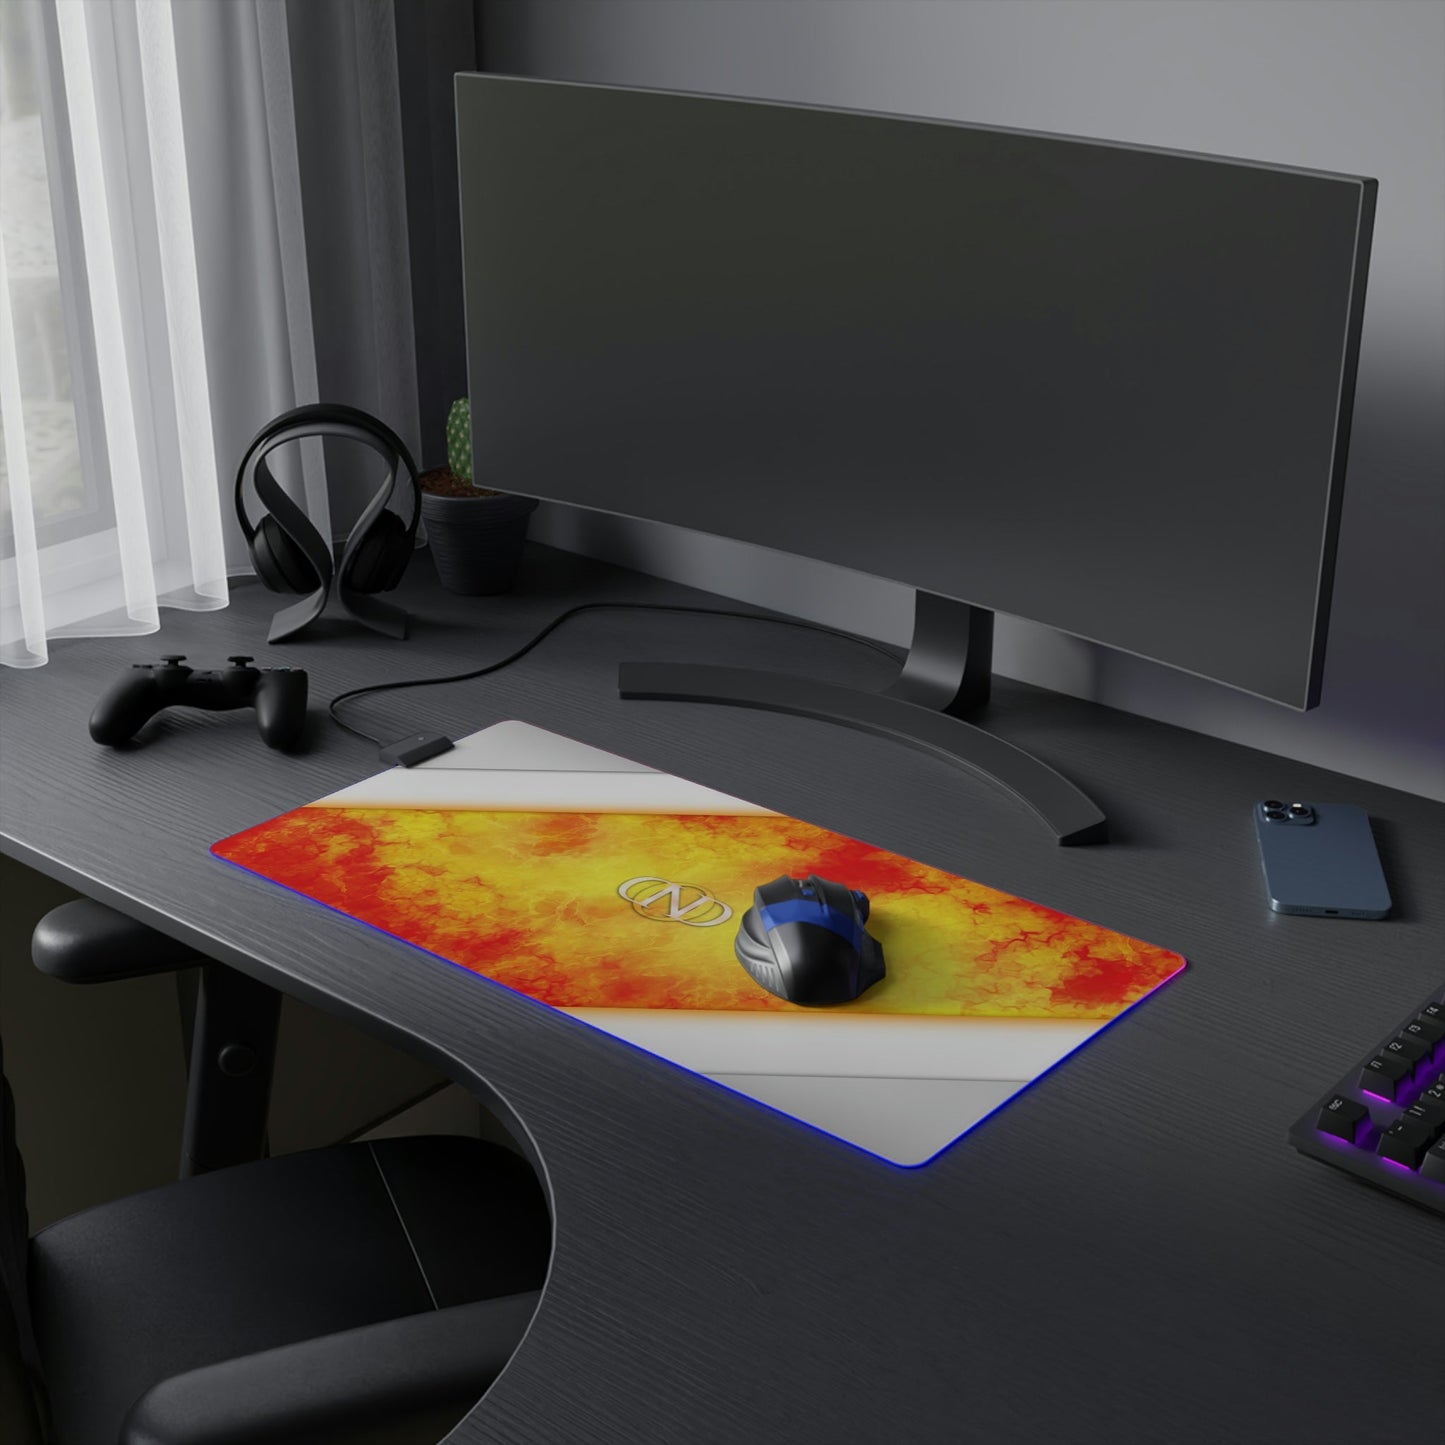 13 Neduz LED Gaming Mouse Pad with Clean Steel Flames Design